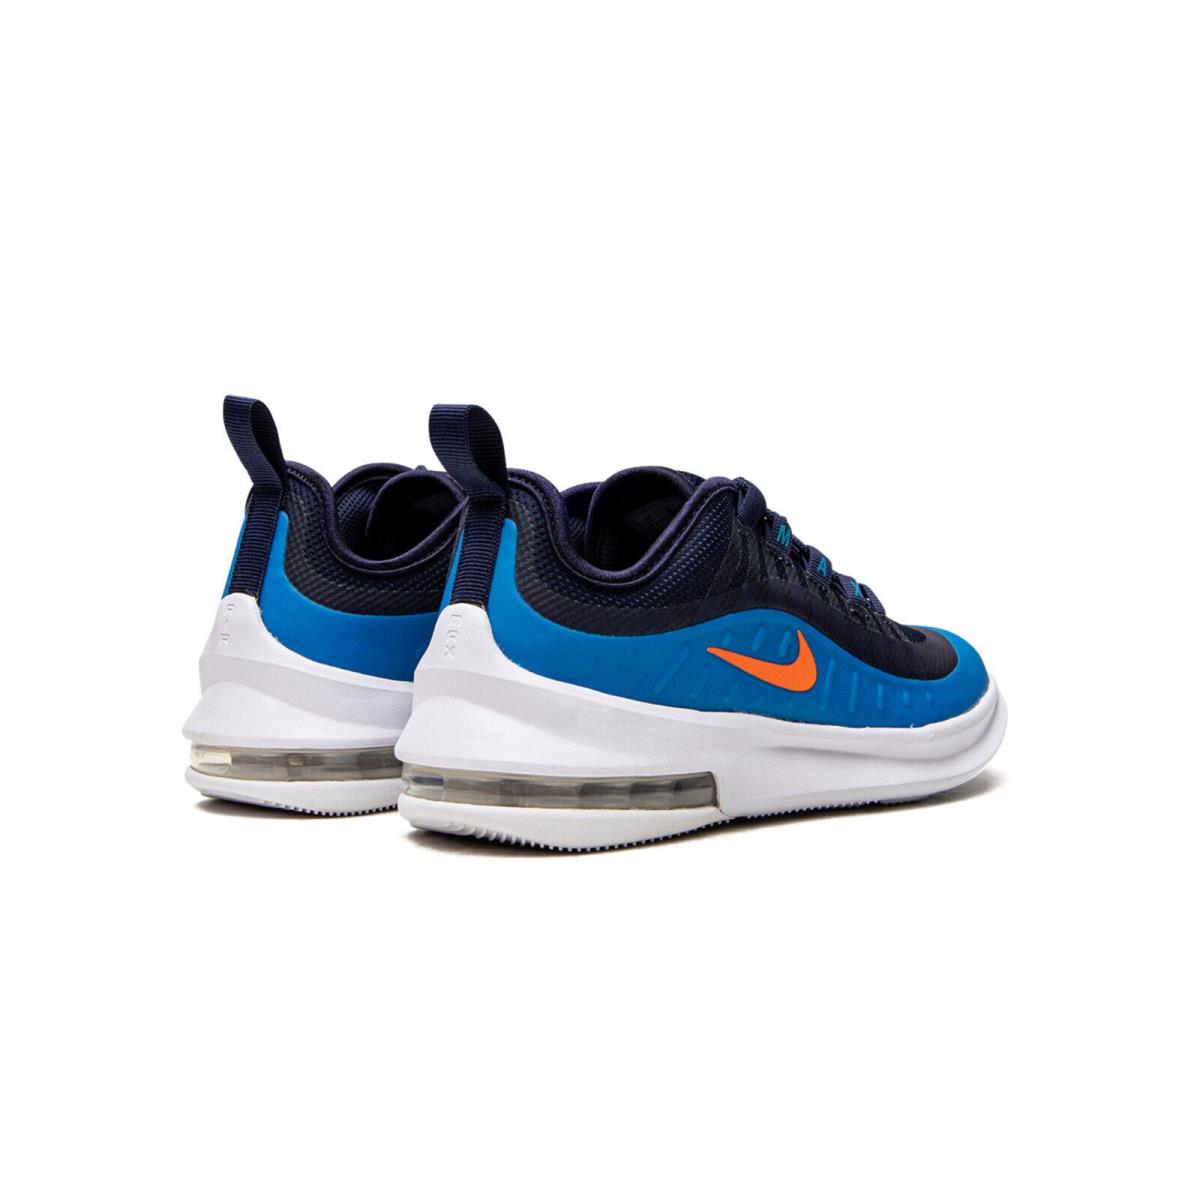 Nike shoes Air Max Axis - Multicolor 1